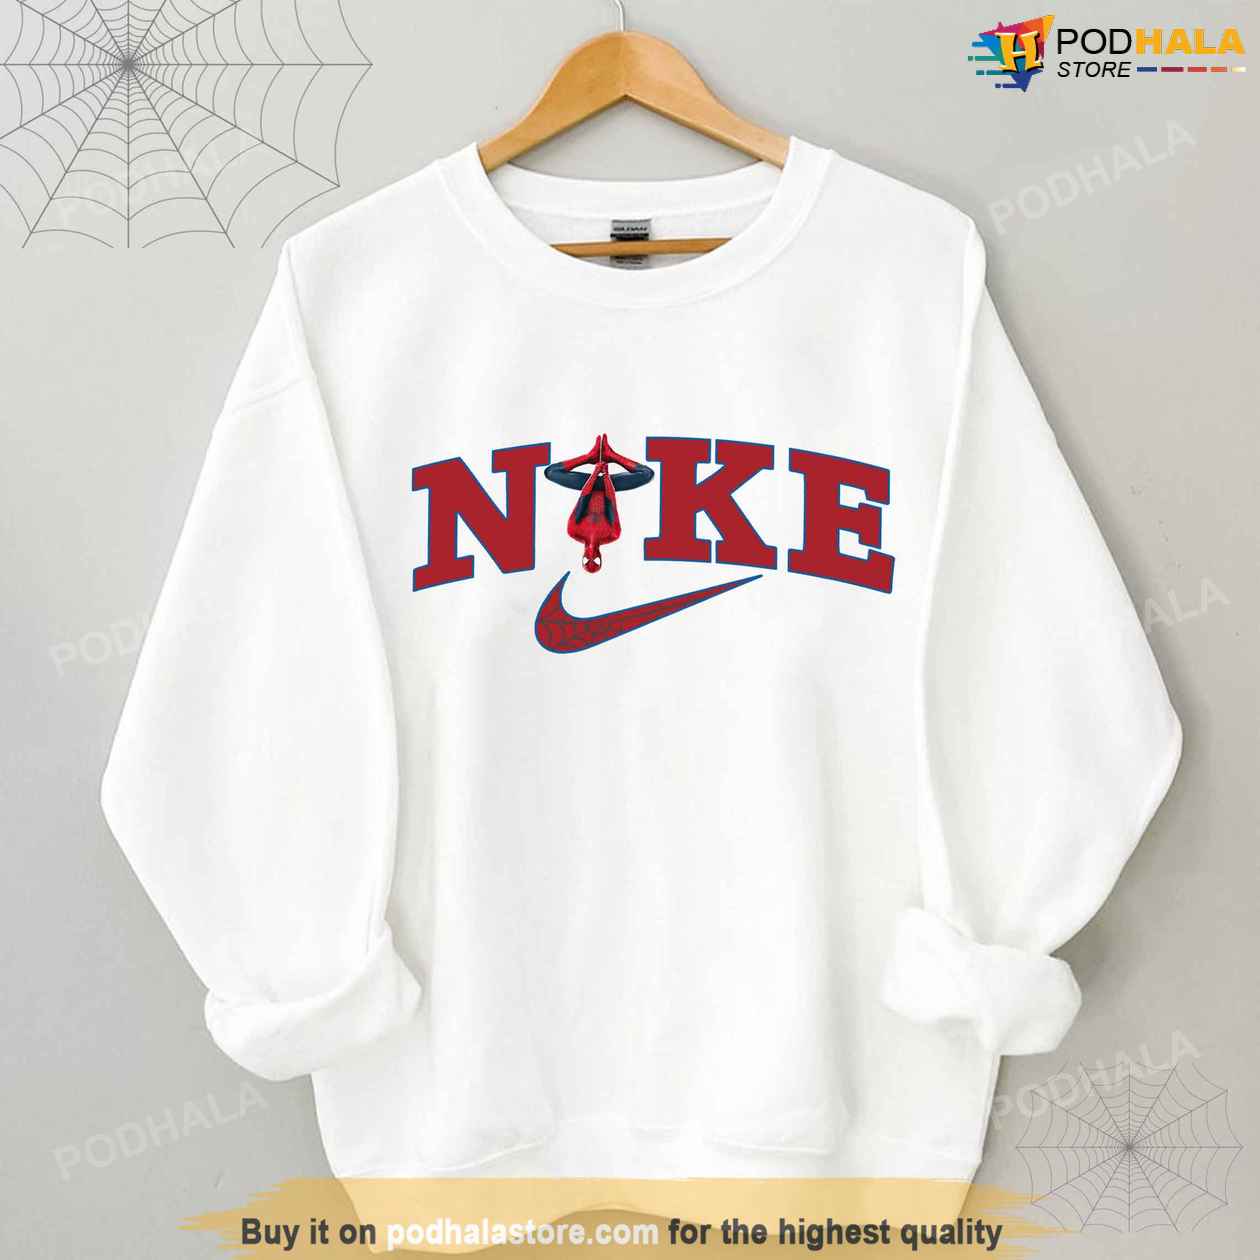 shuttle Decoderen Ontvangst Spiderman Nike Sweatshirt Peter Parker Marvel Unisex White Sweatshirt -  Bring Your Ideas, Thoughts And Imaginations Into Reality Today